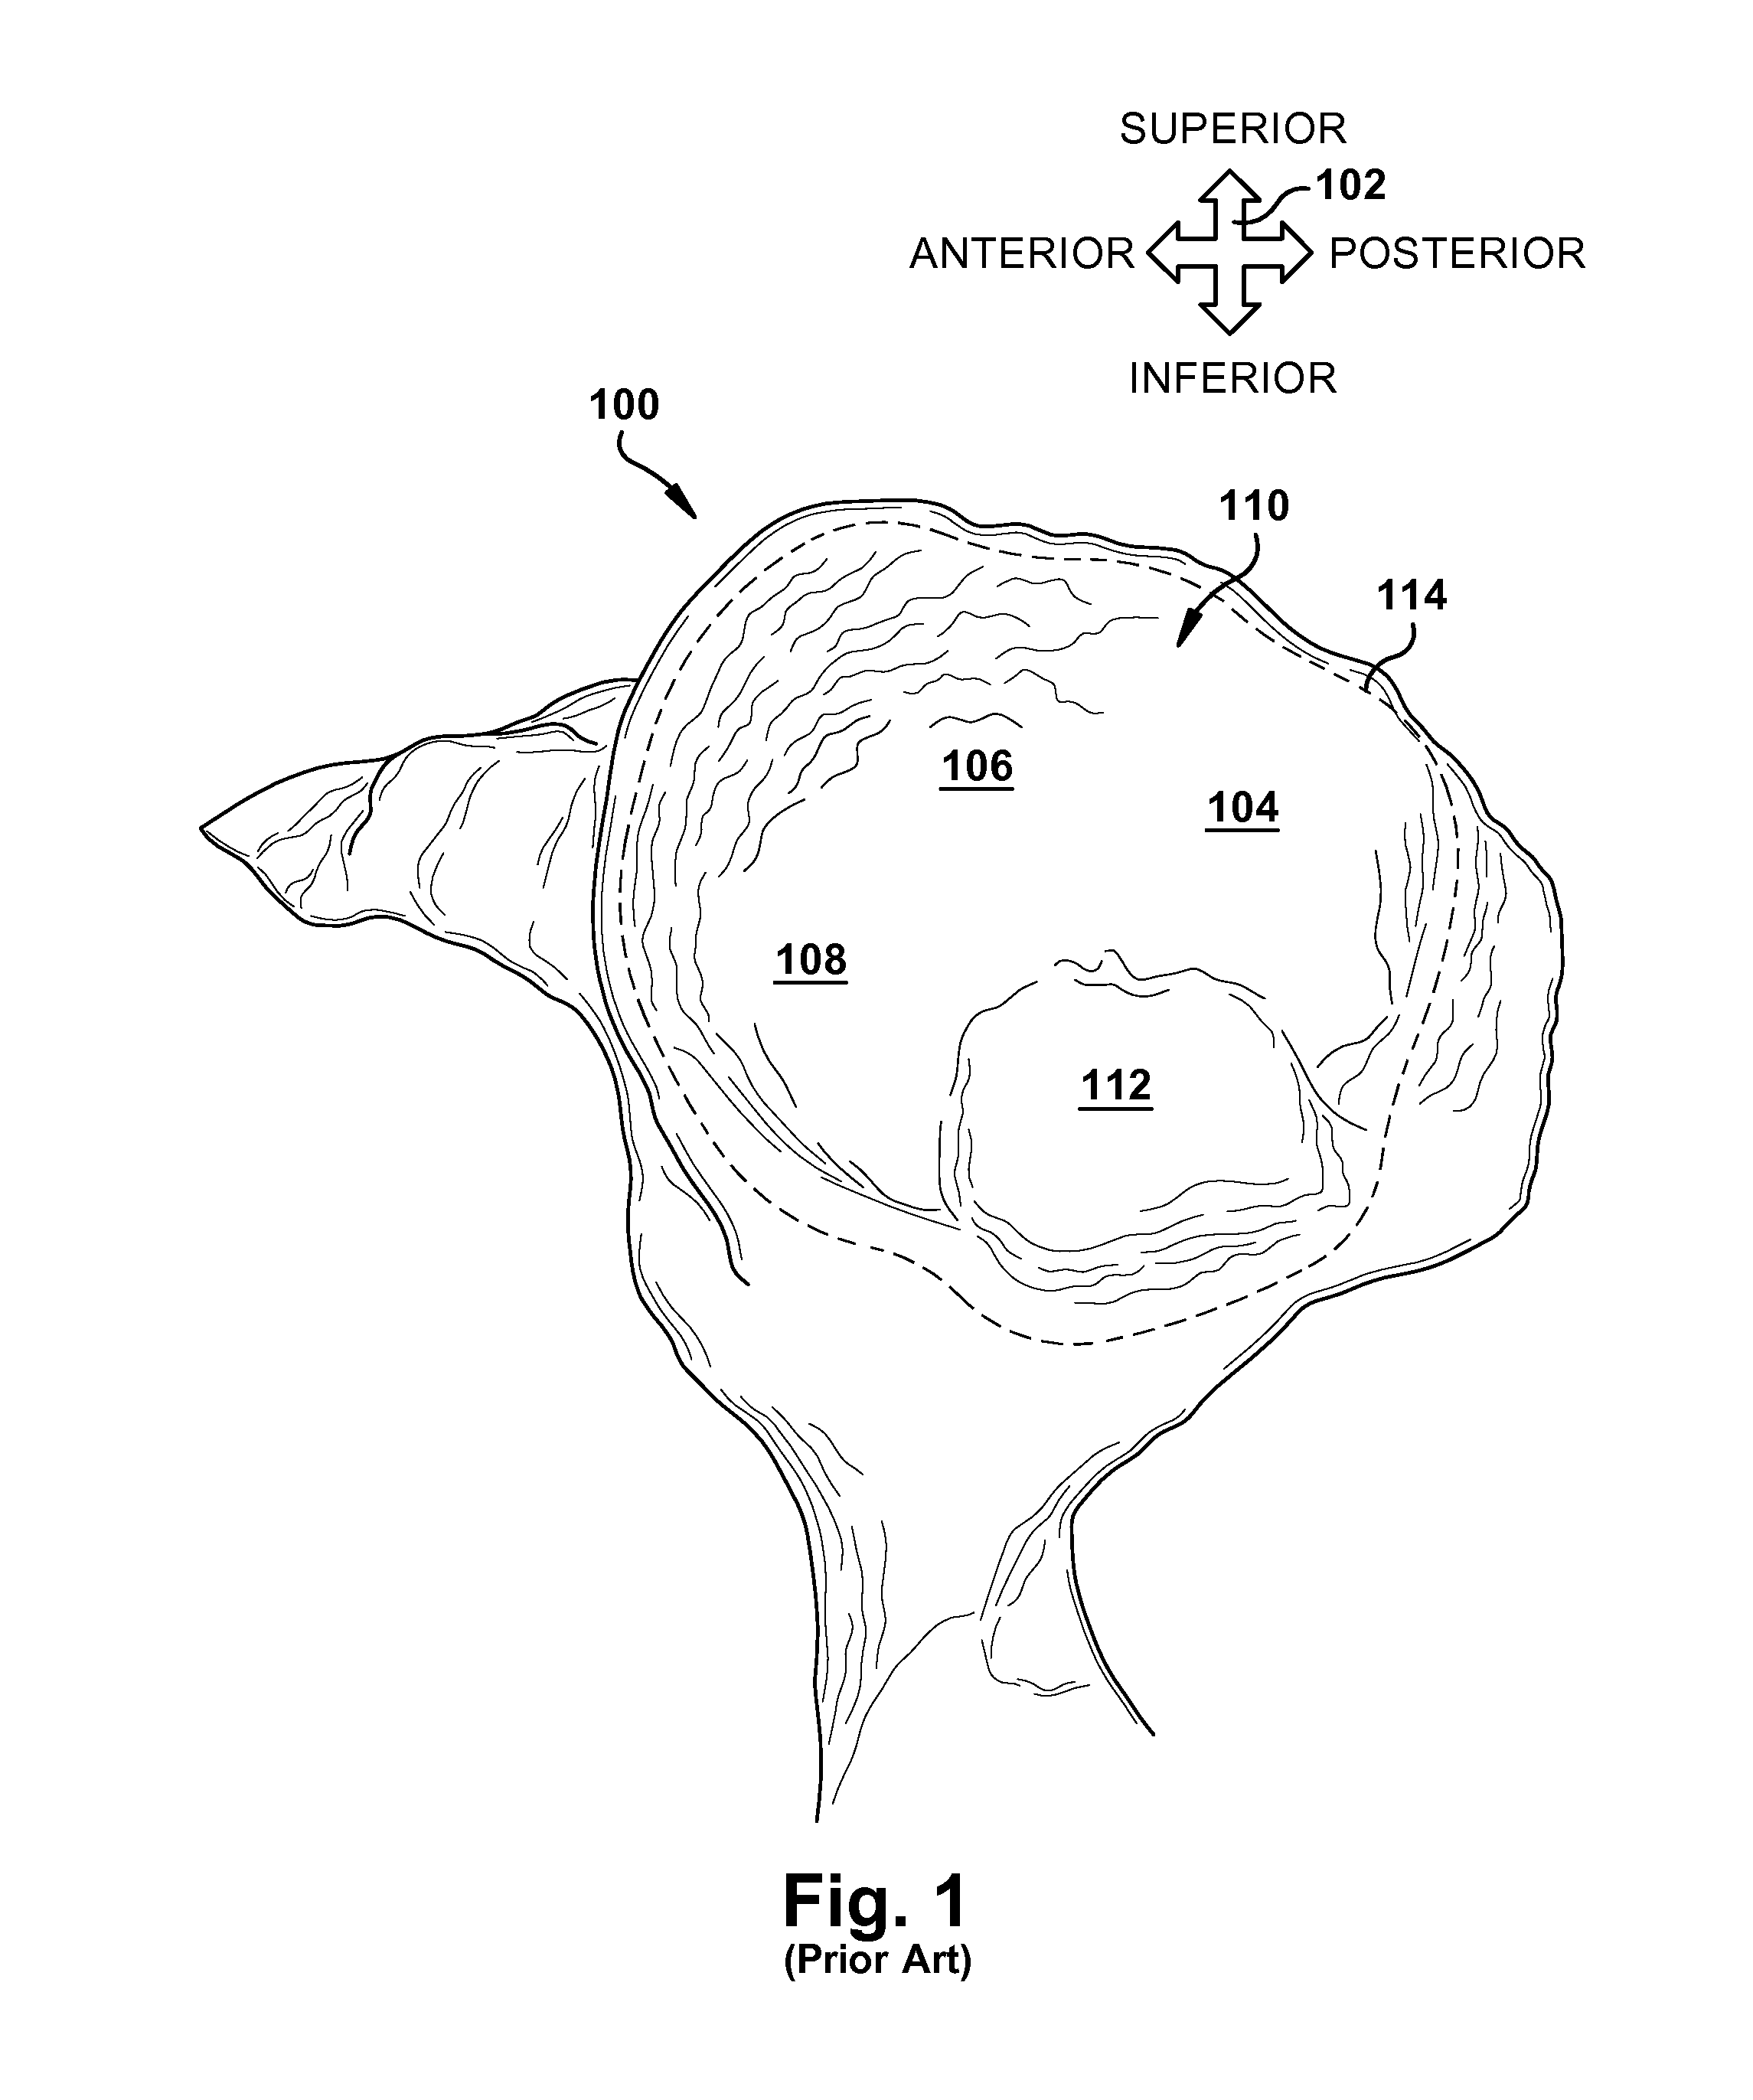 System and method for assisting with attachment of a stock implant to a patient tissue